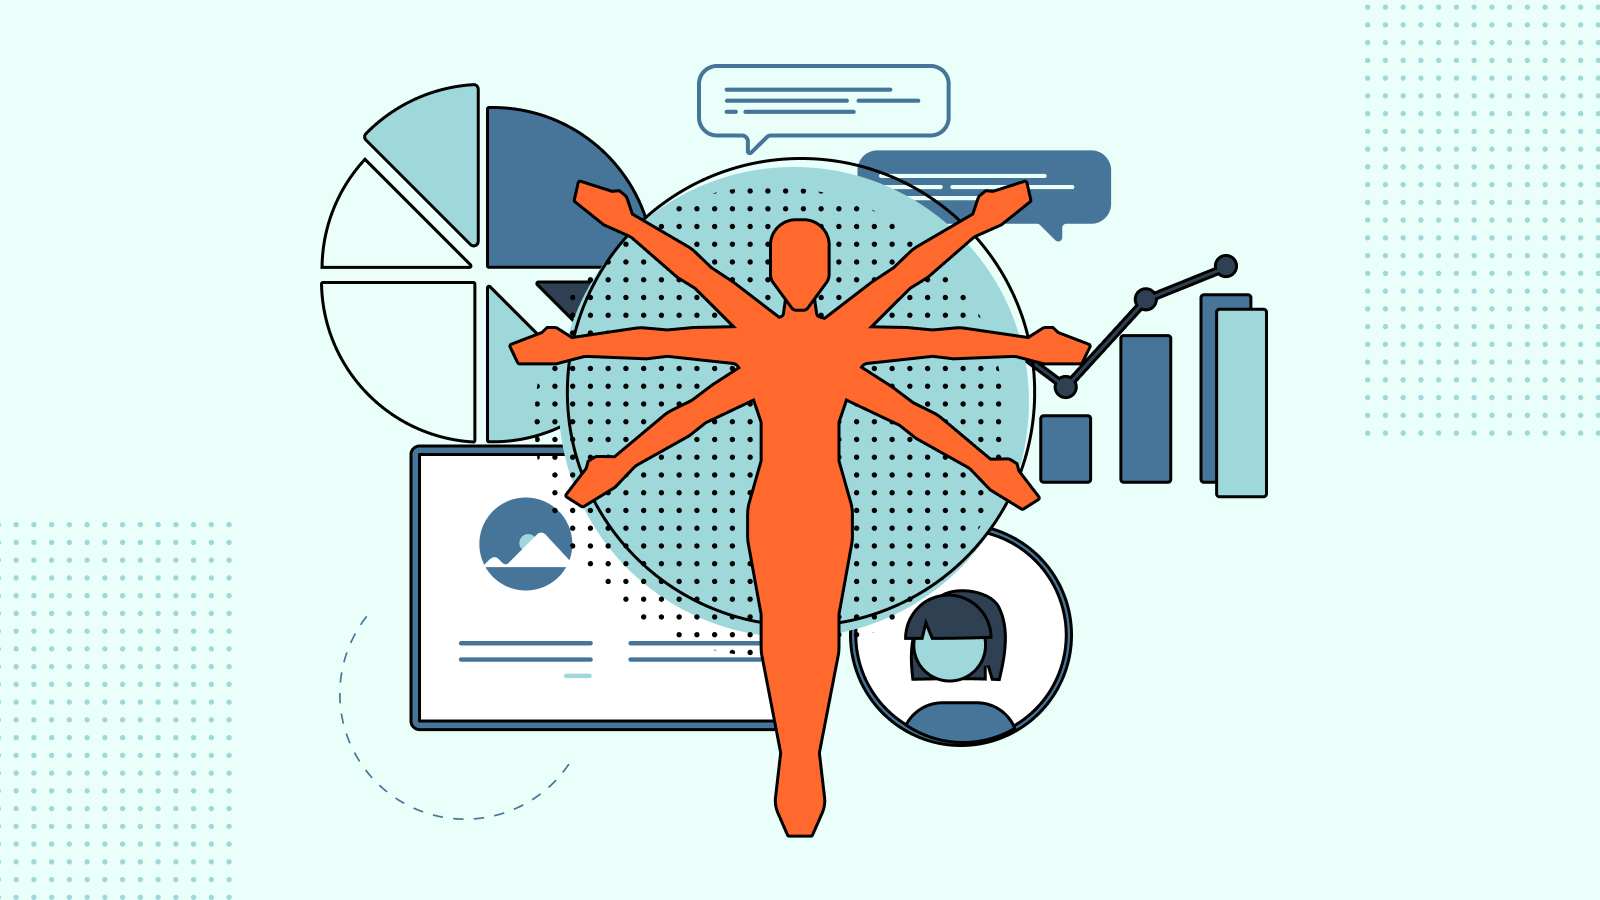 An illustration of an orange, six-armed person floating above icons which signify the many tasks that may be saddled on a single employee.